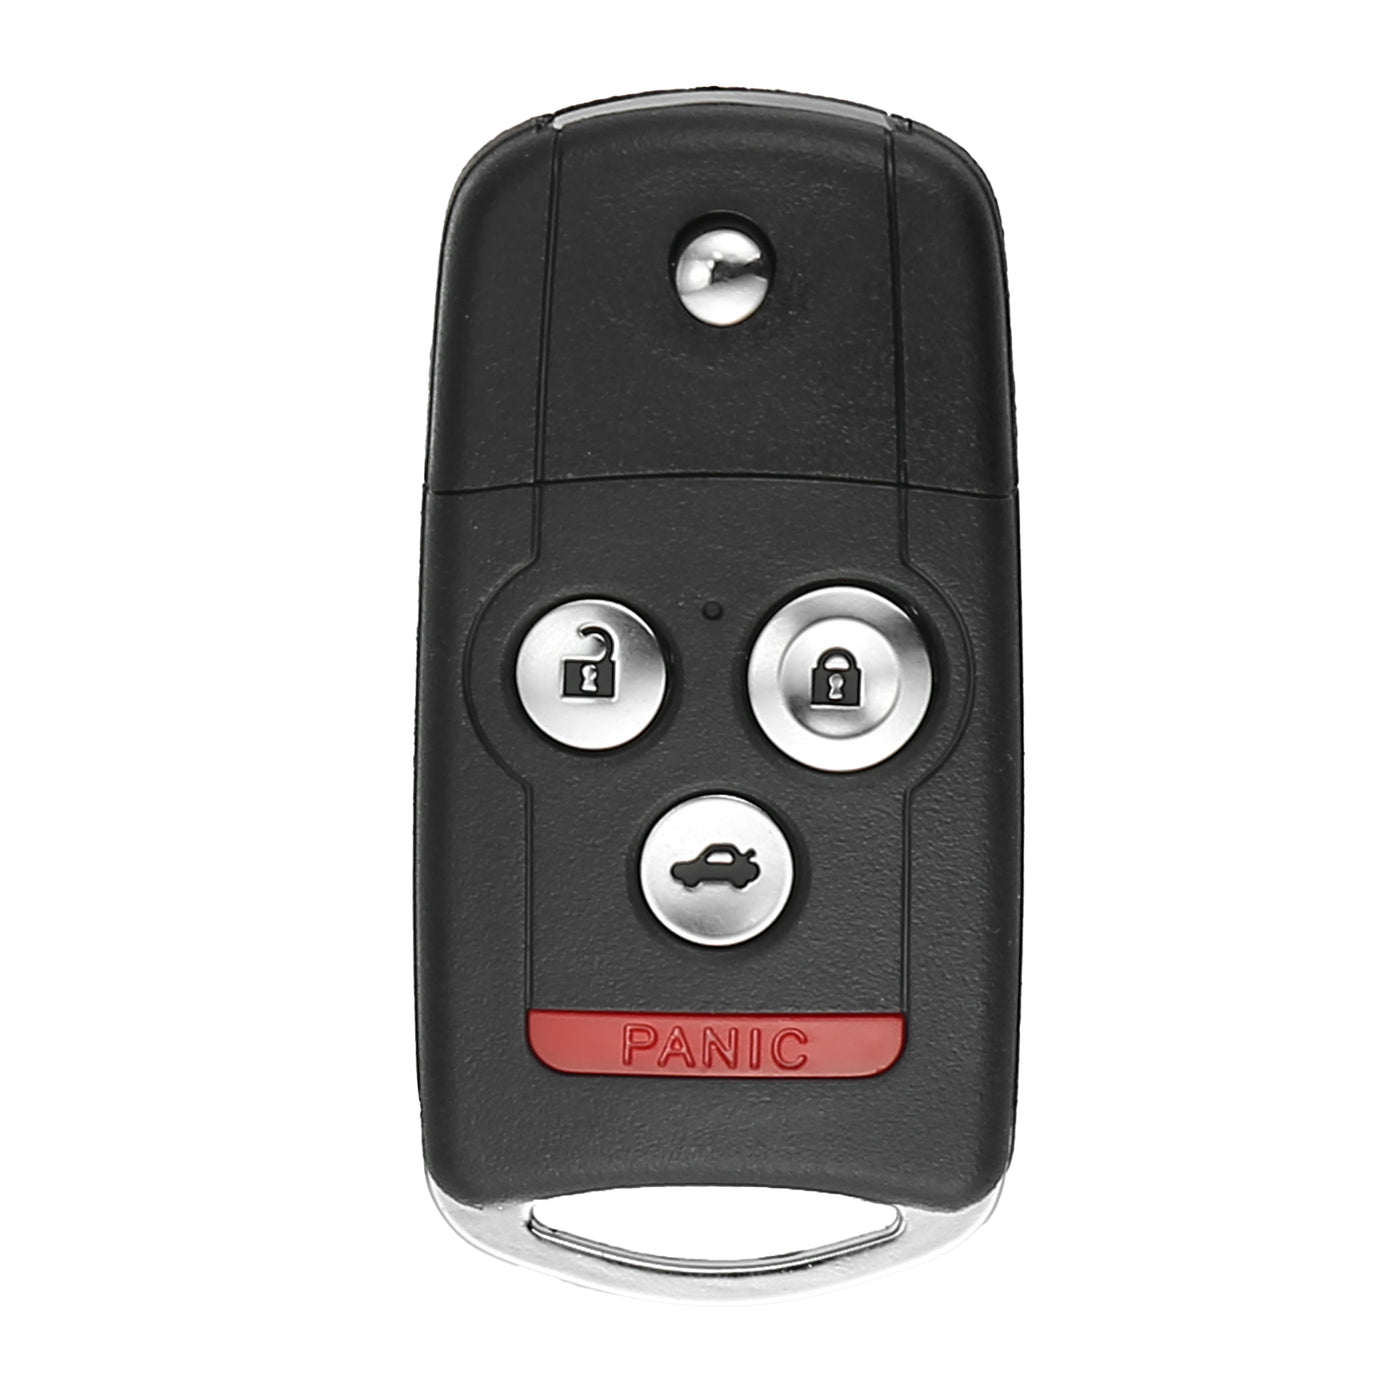 4 Button Car Flip Keyless Entry Remote Control Replacement Key Fob